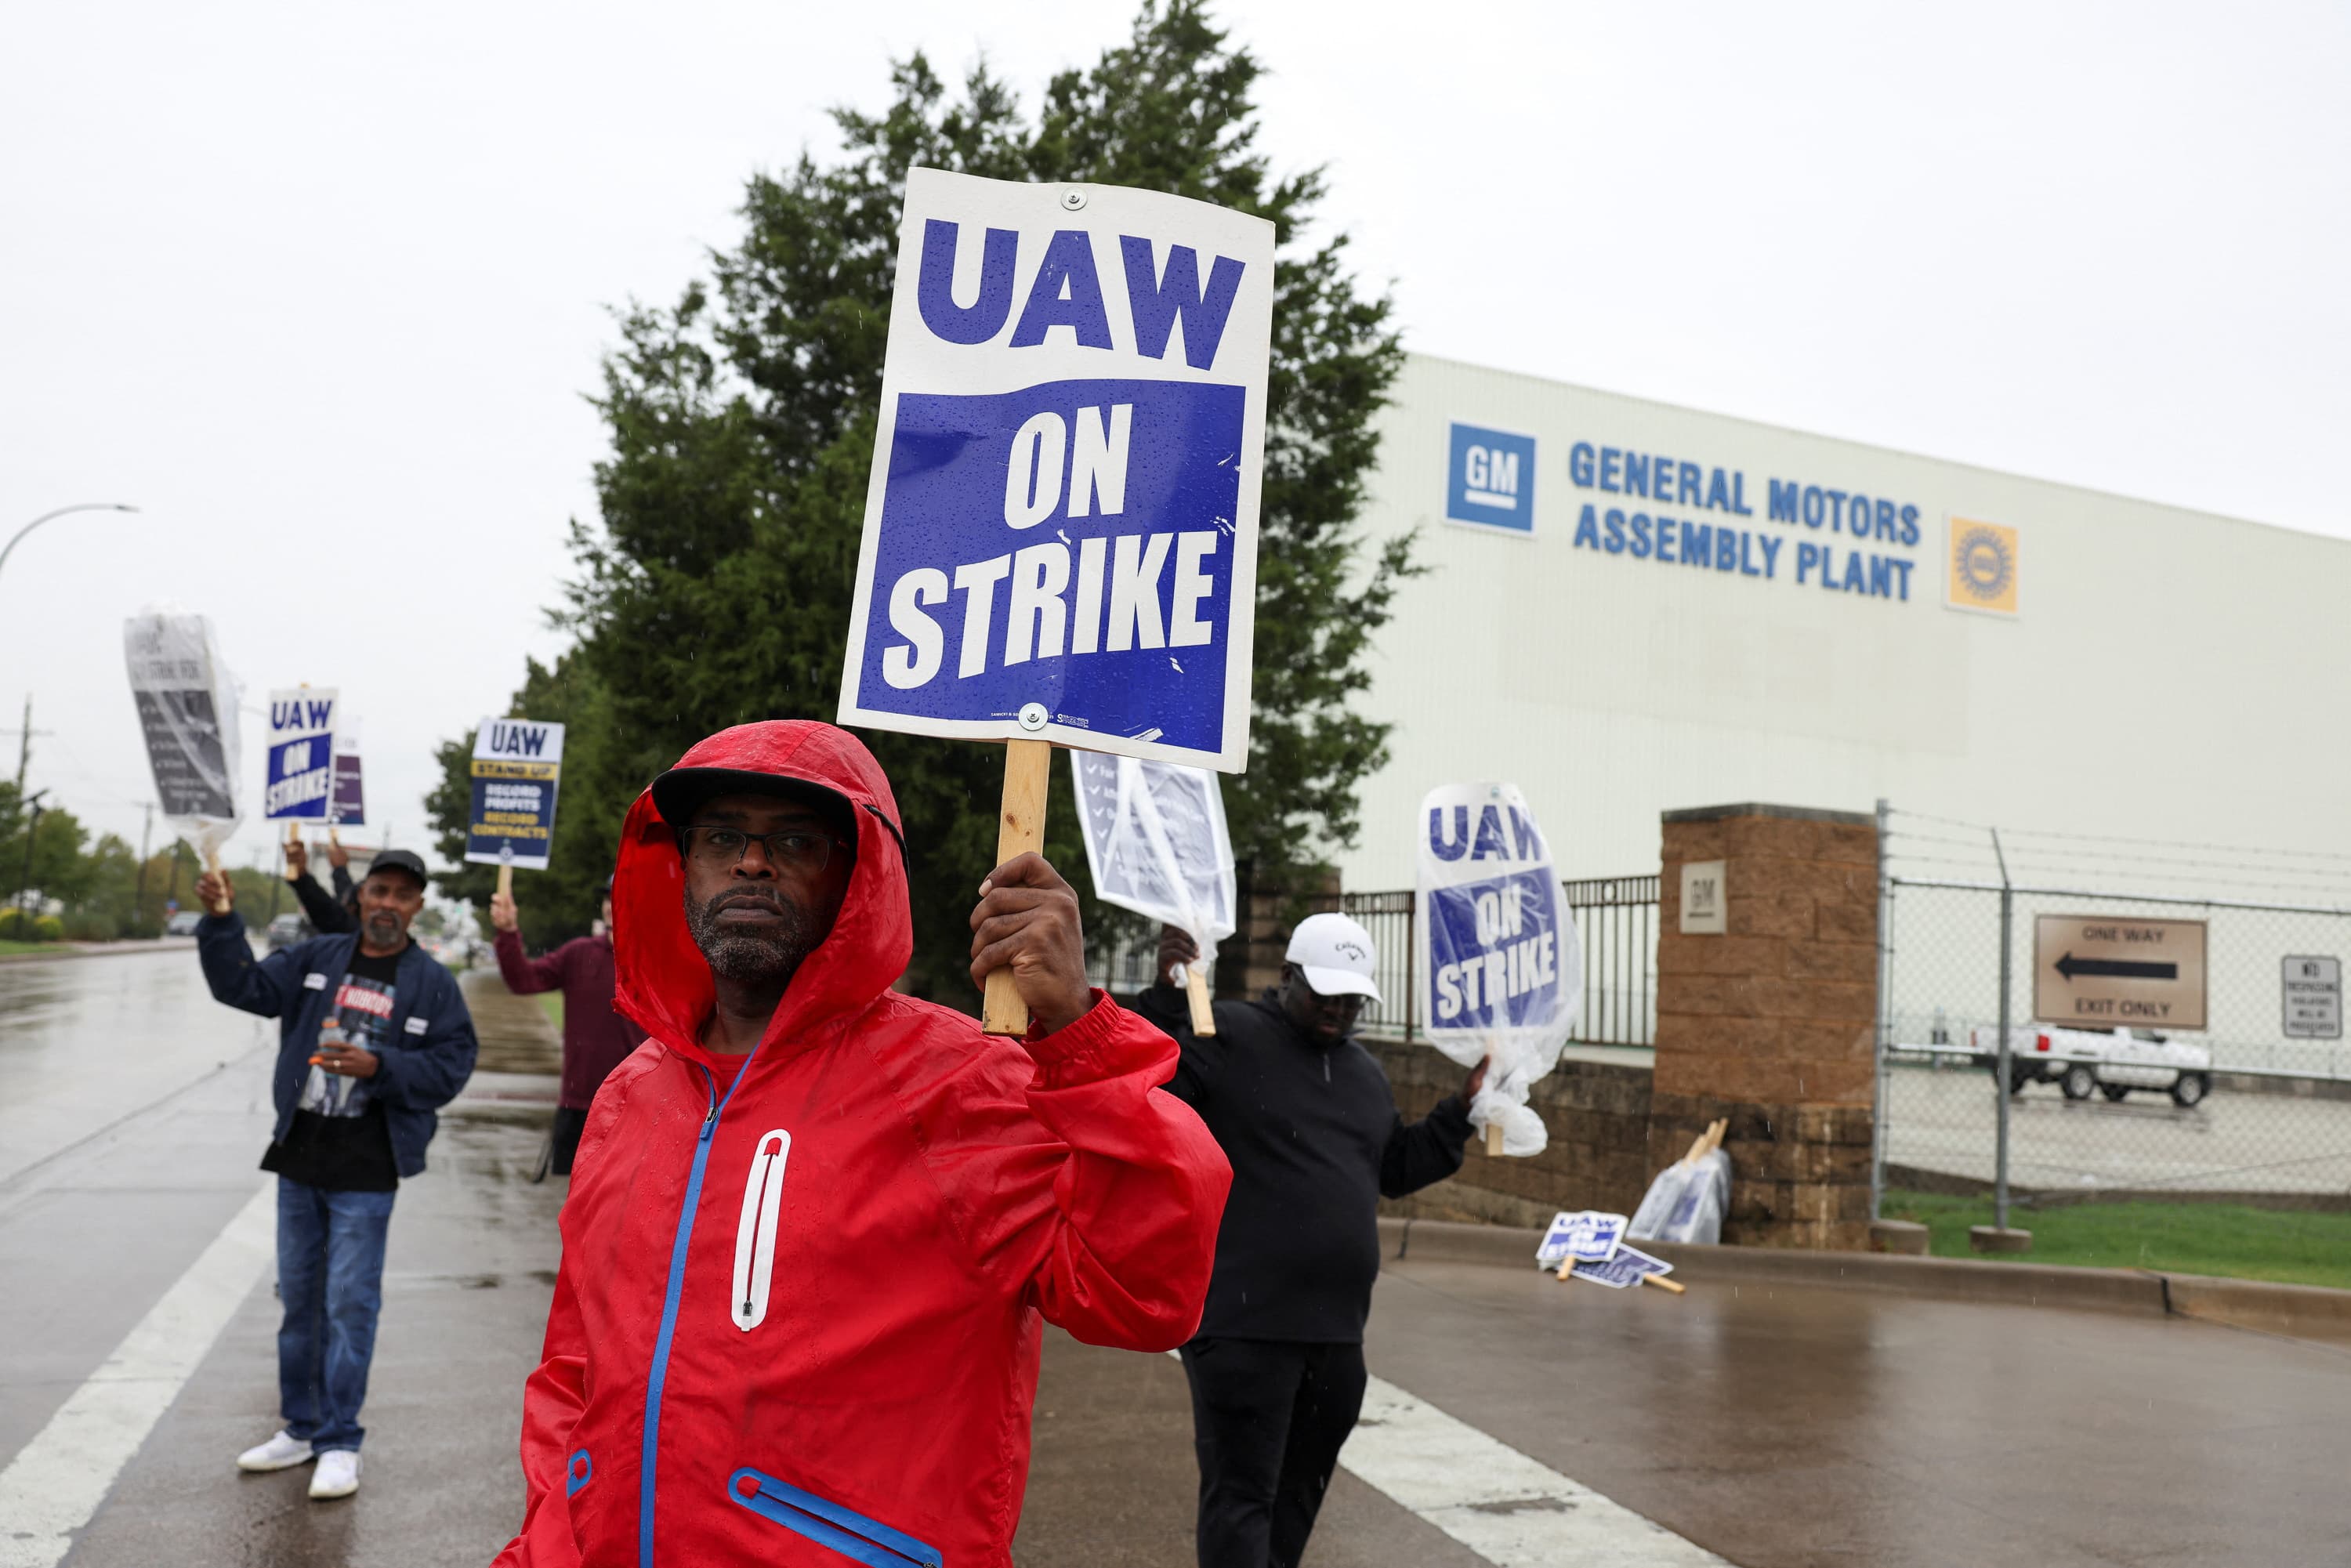 GM is expected to invest $13 billion in U.S. factories under the new UAW deal